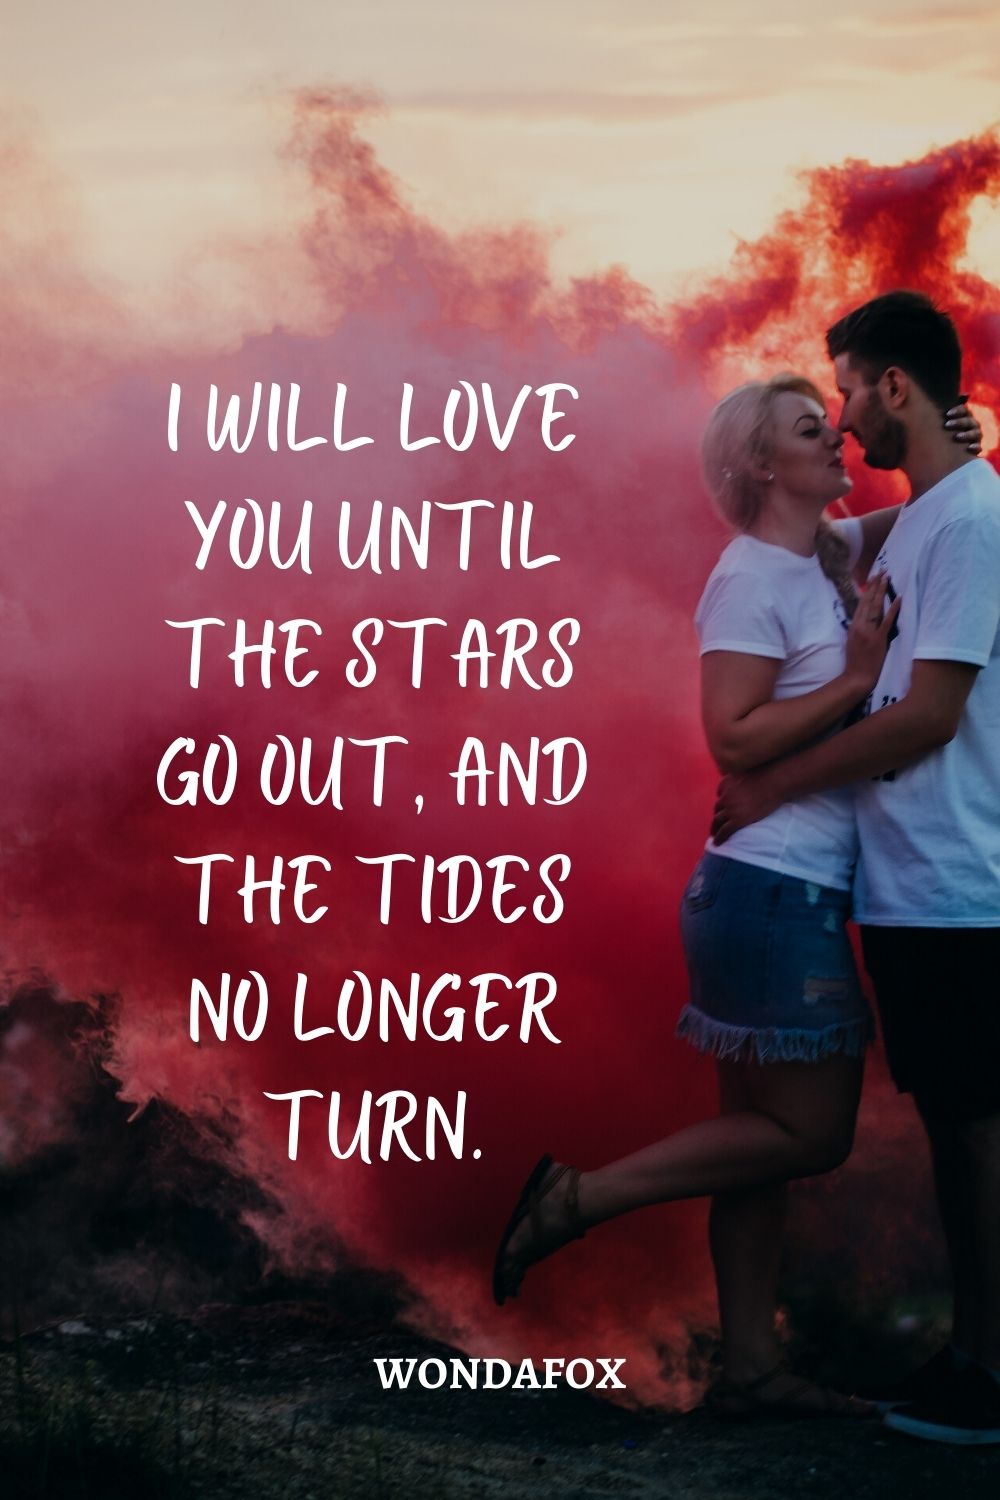 I will love you until the stars go out, and the tides no longer turn.